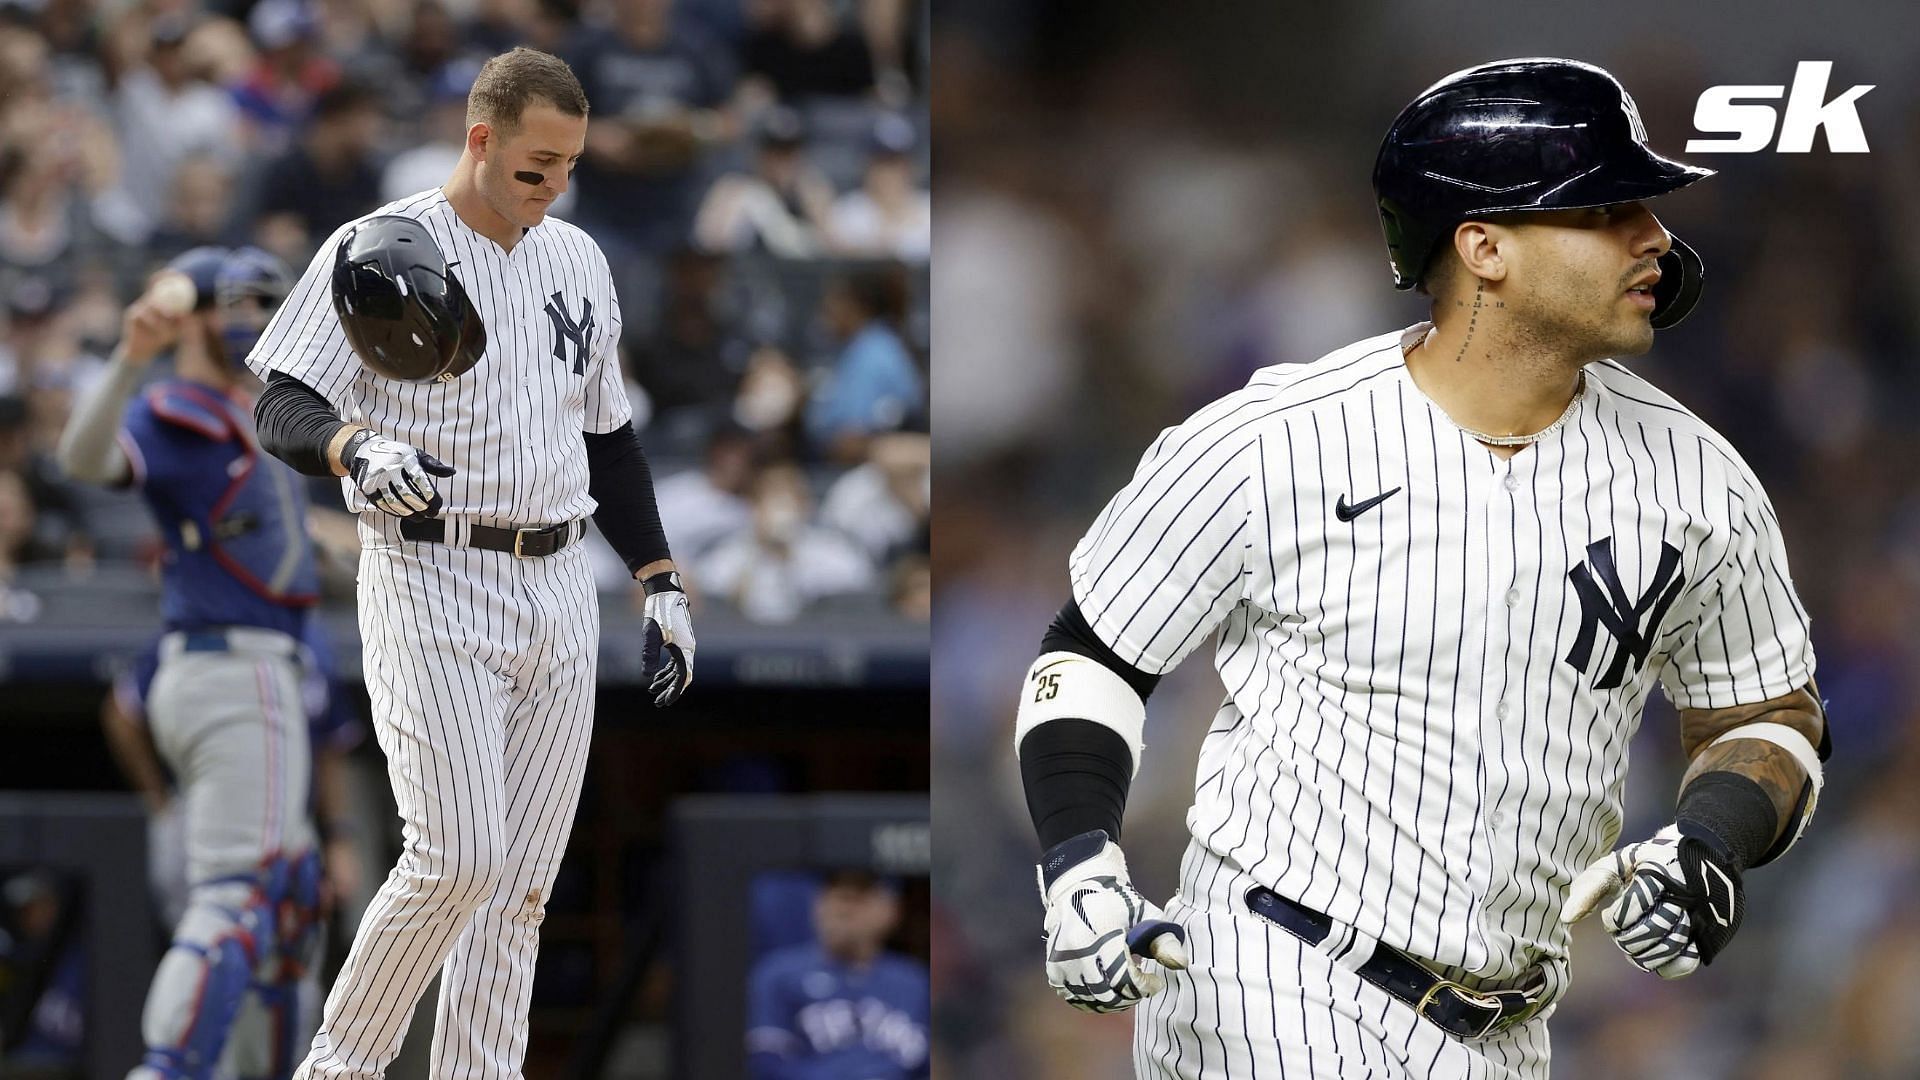 MLB fantasy baseball managers should look at New York Yankees stars Anthony Rizzo and Gleyber Torres in their drafts